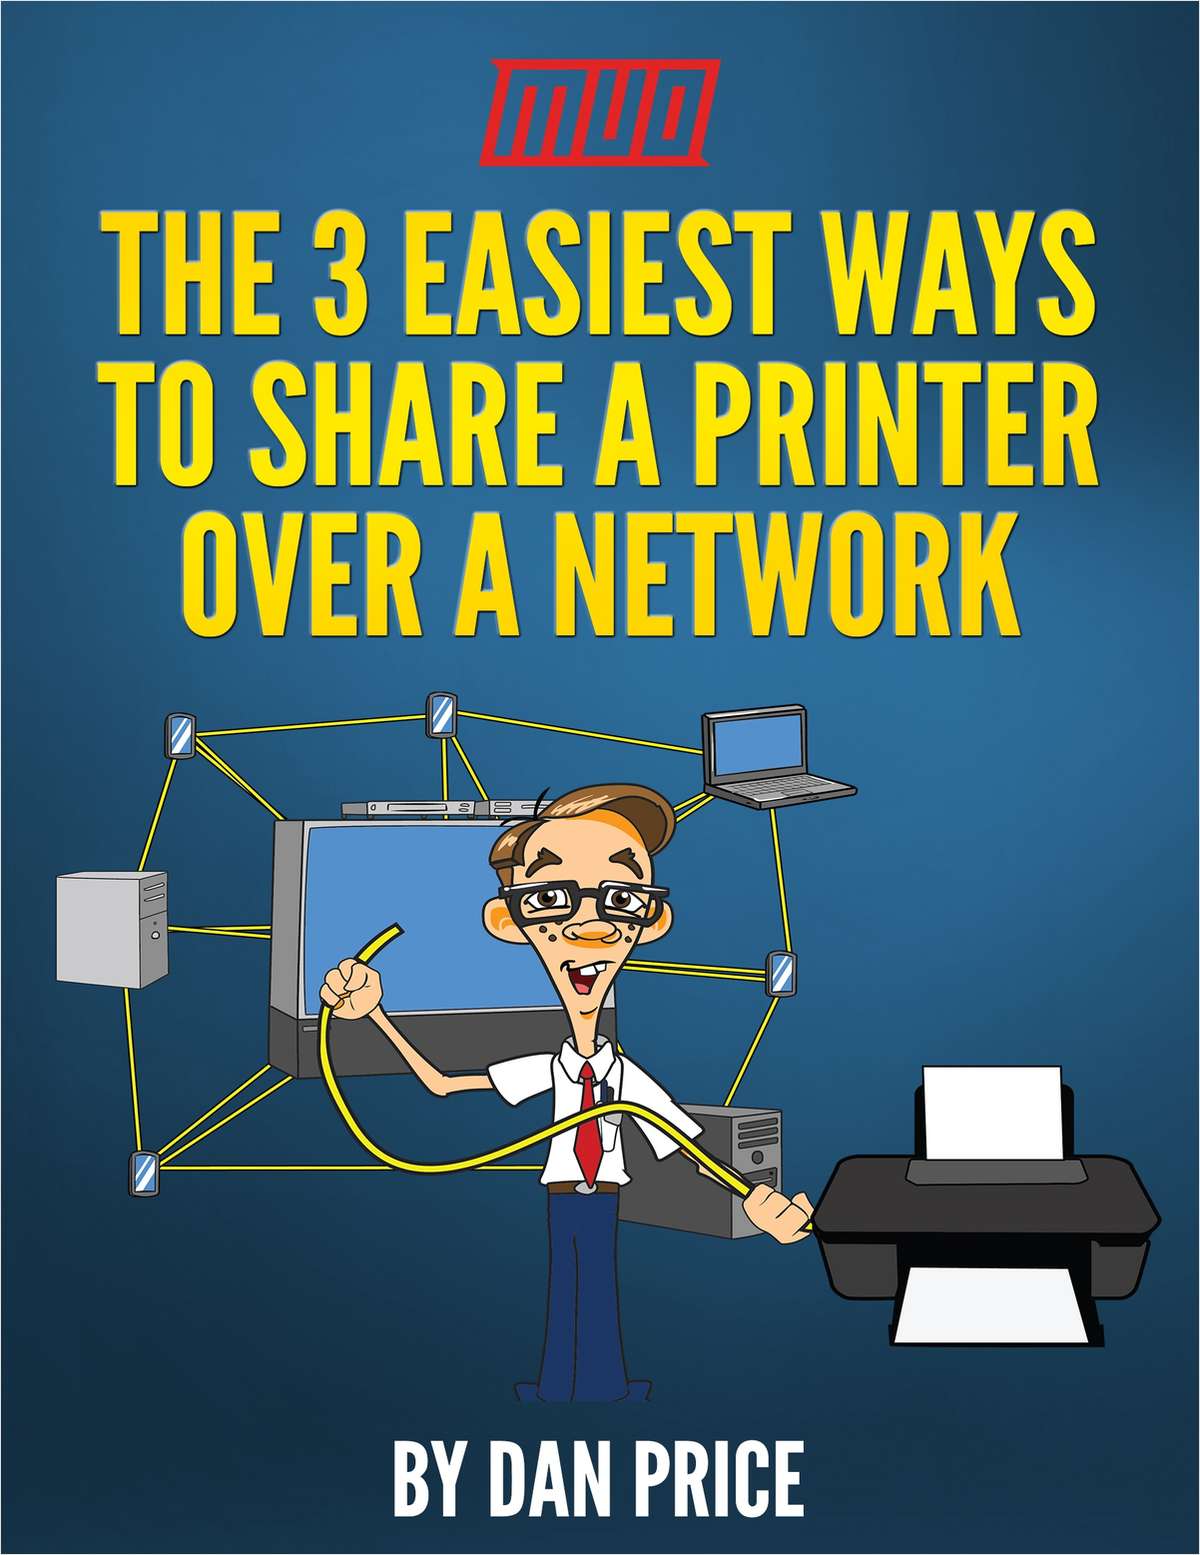 The 3 Easiest ways to Share a Printer Over a Network